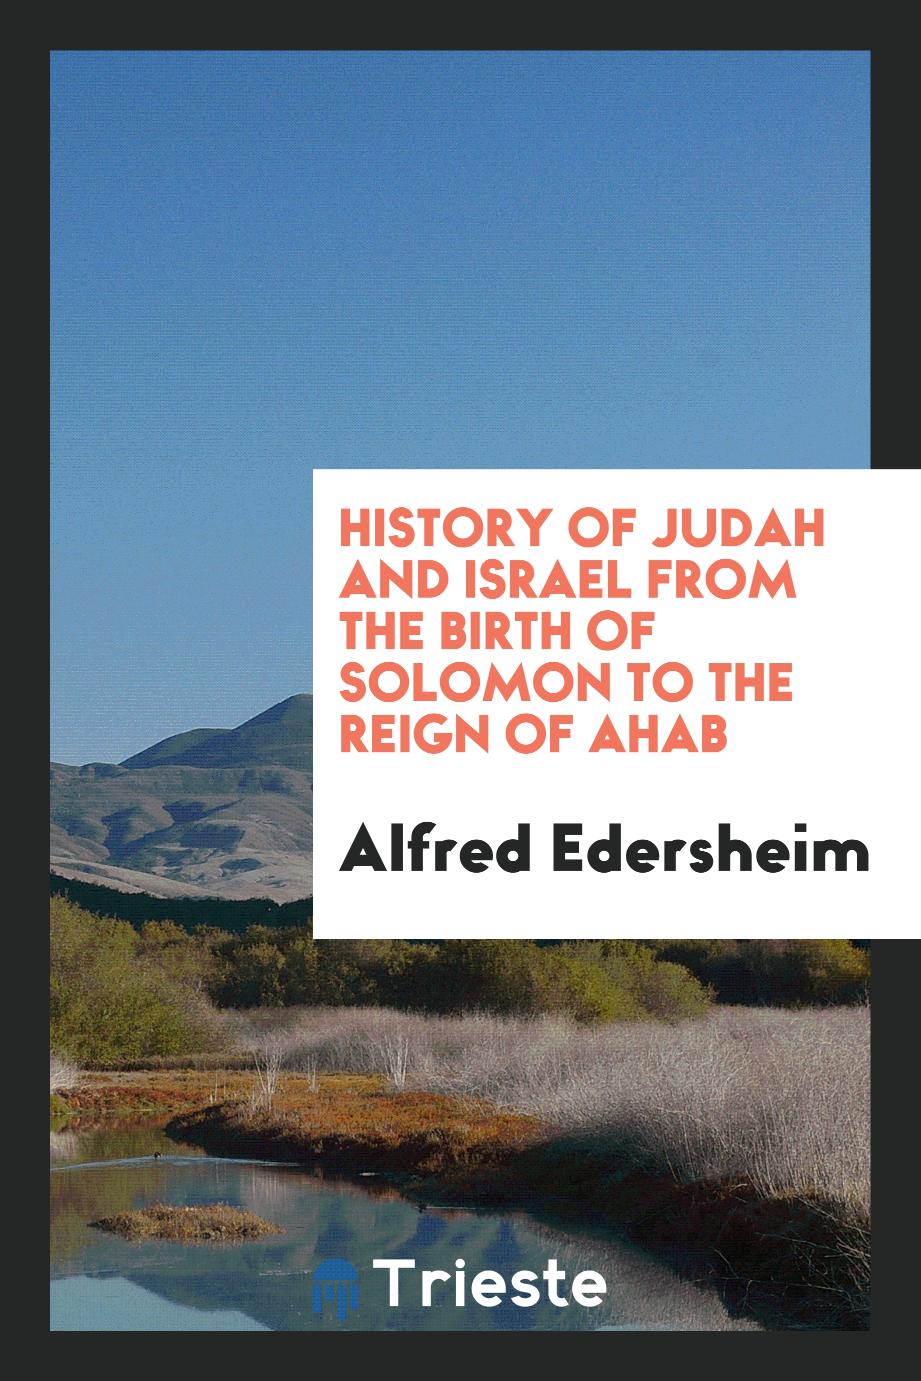 History of Judah and Israel from the birth of Solomon to the reign of Ahab